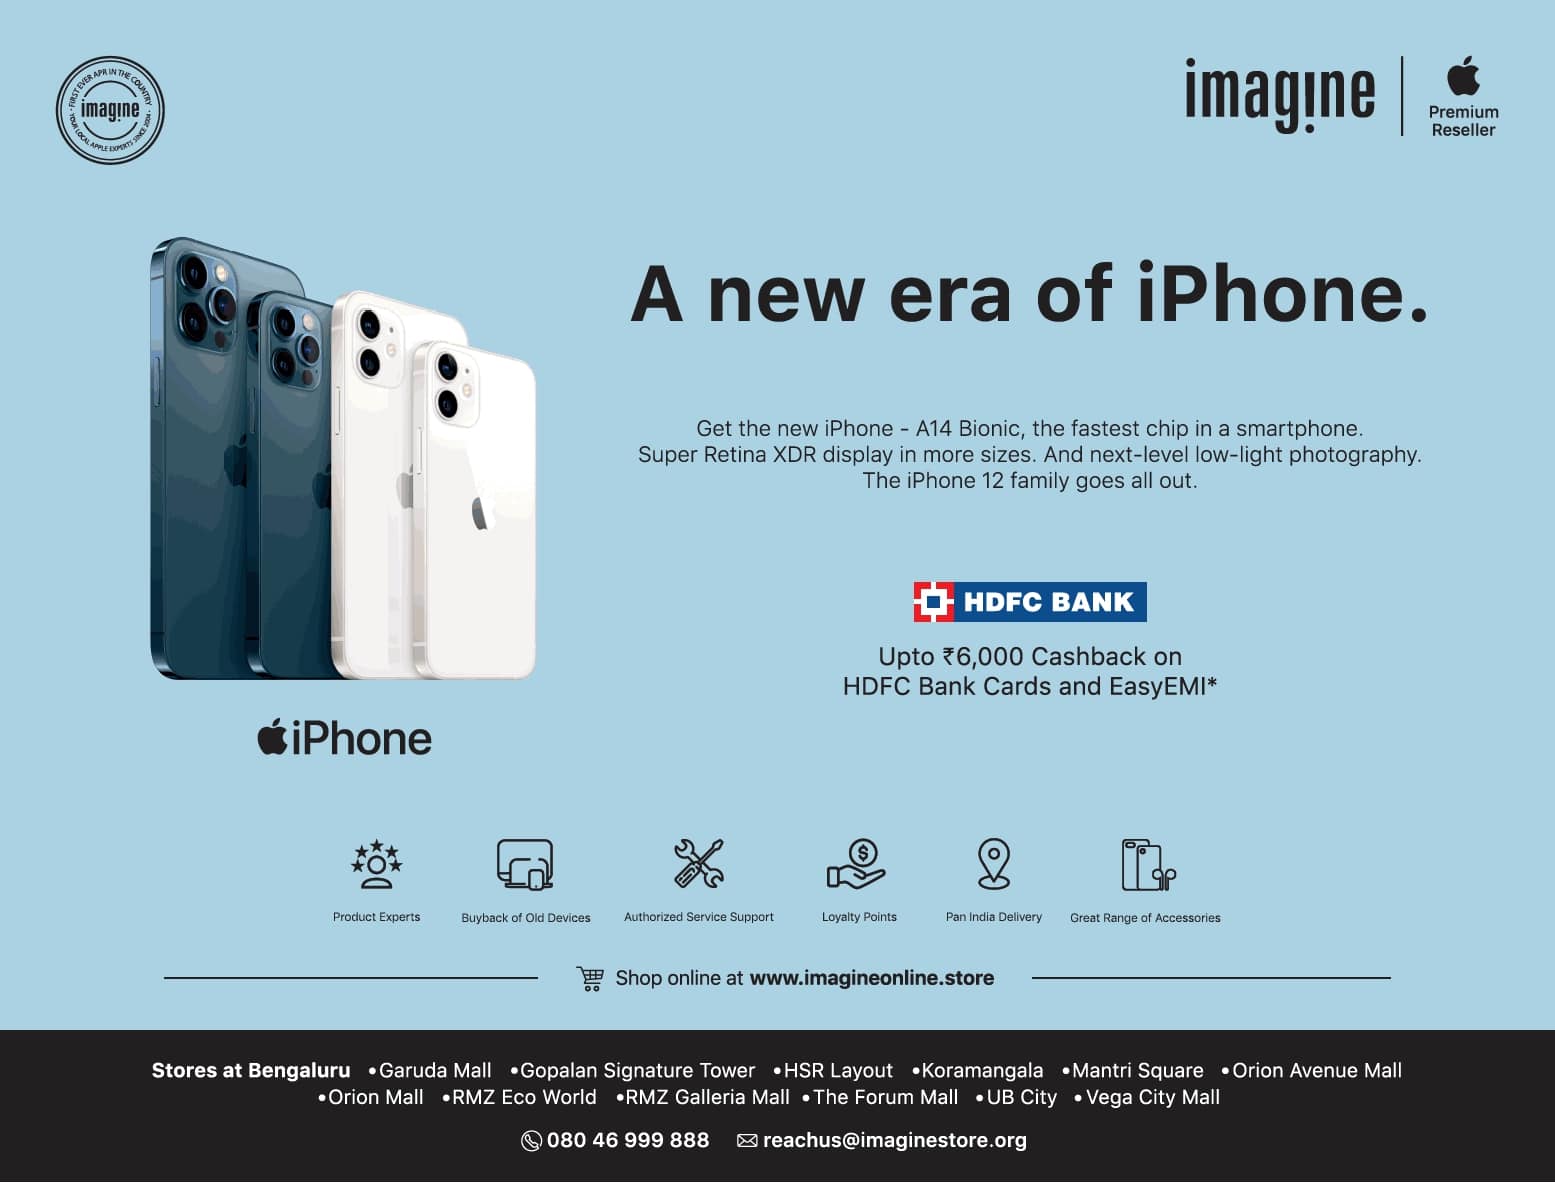 iphone-a-new-era-of-iphone-get-the-new-iphone-a14-bionic-the-fastest-chip-in-a-smartphone-ad-toi-bangalore-13-11-2020